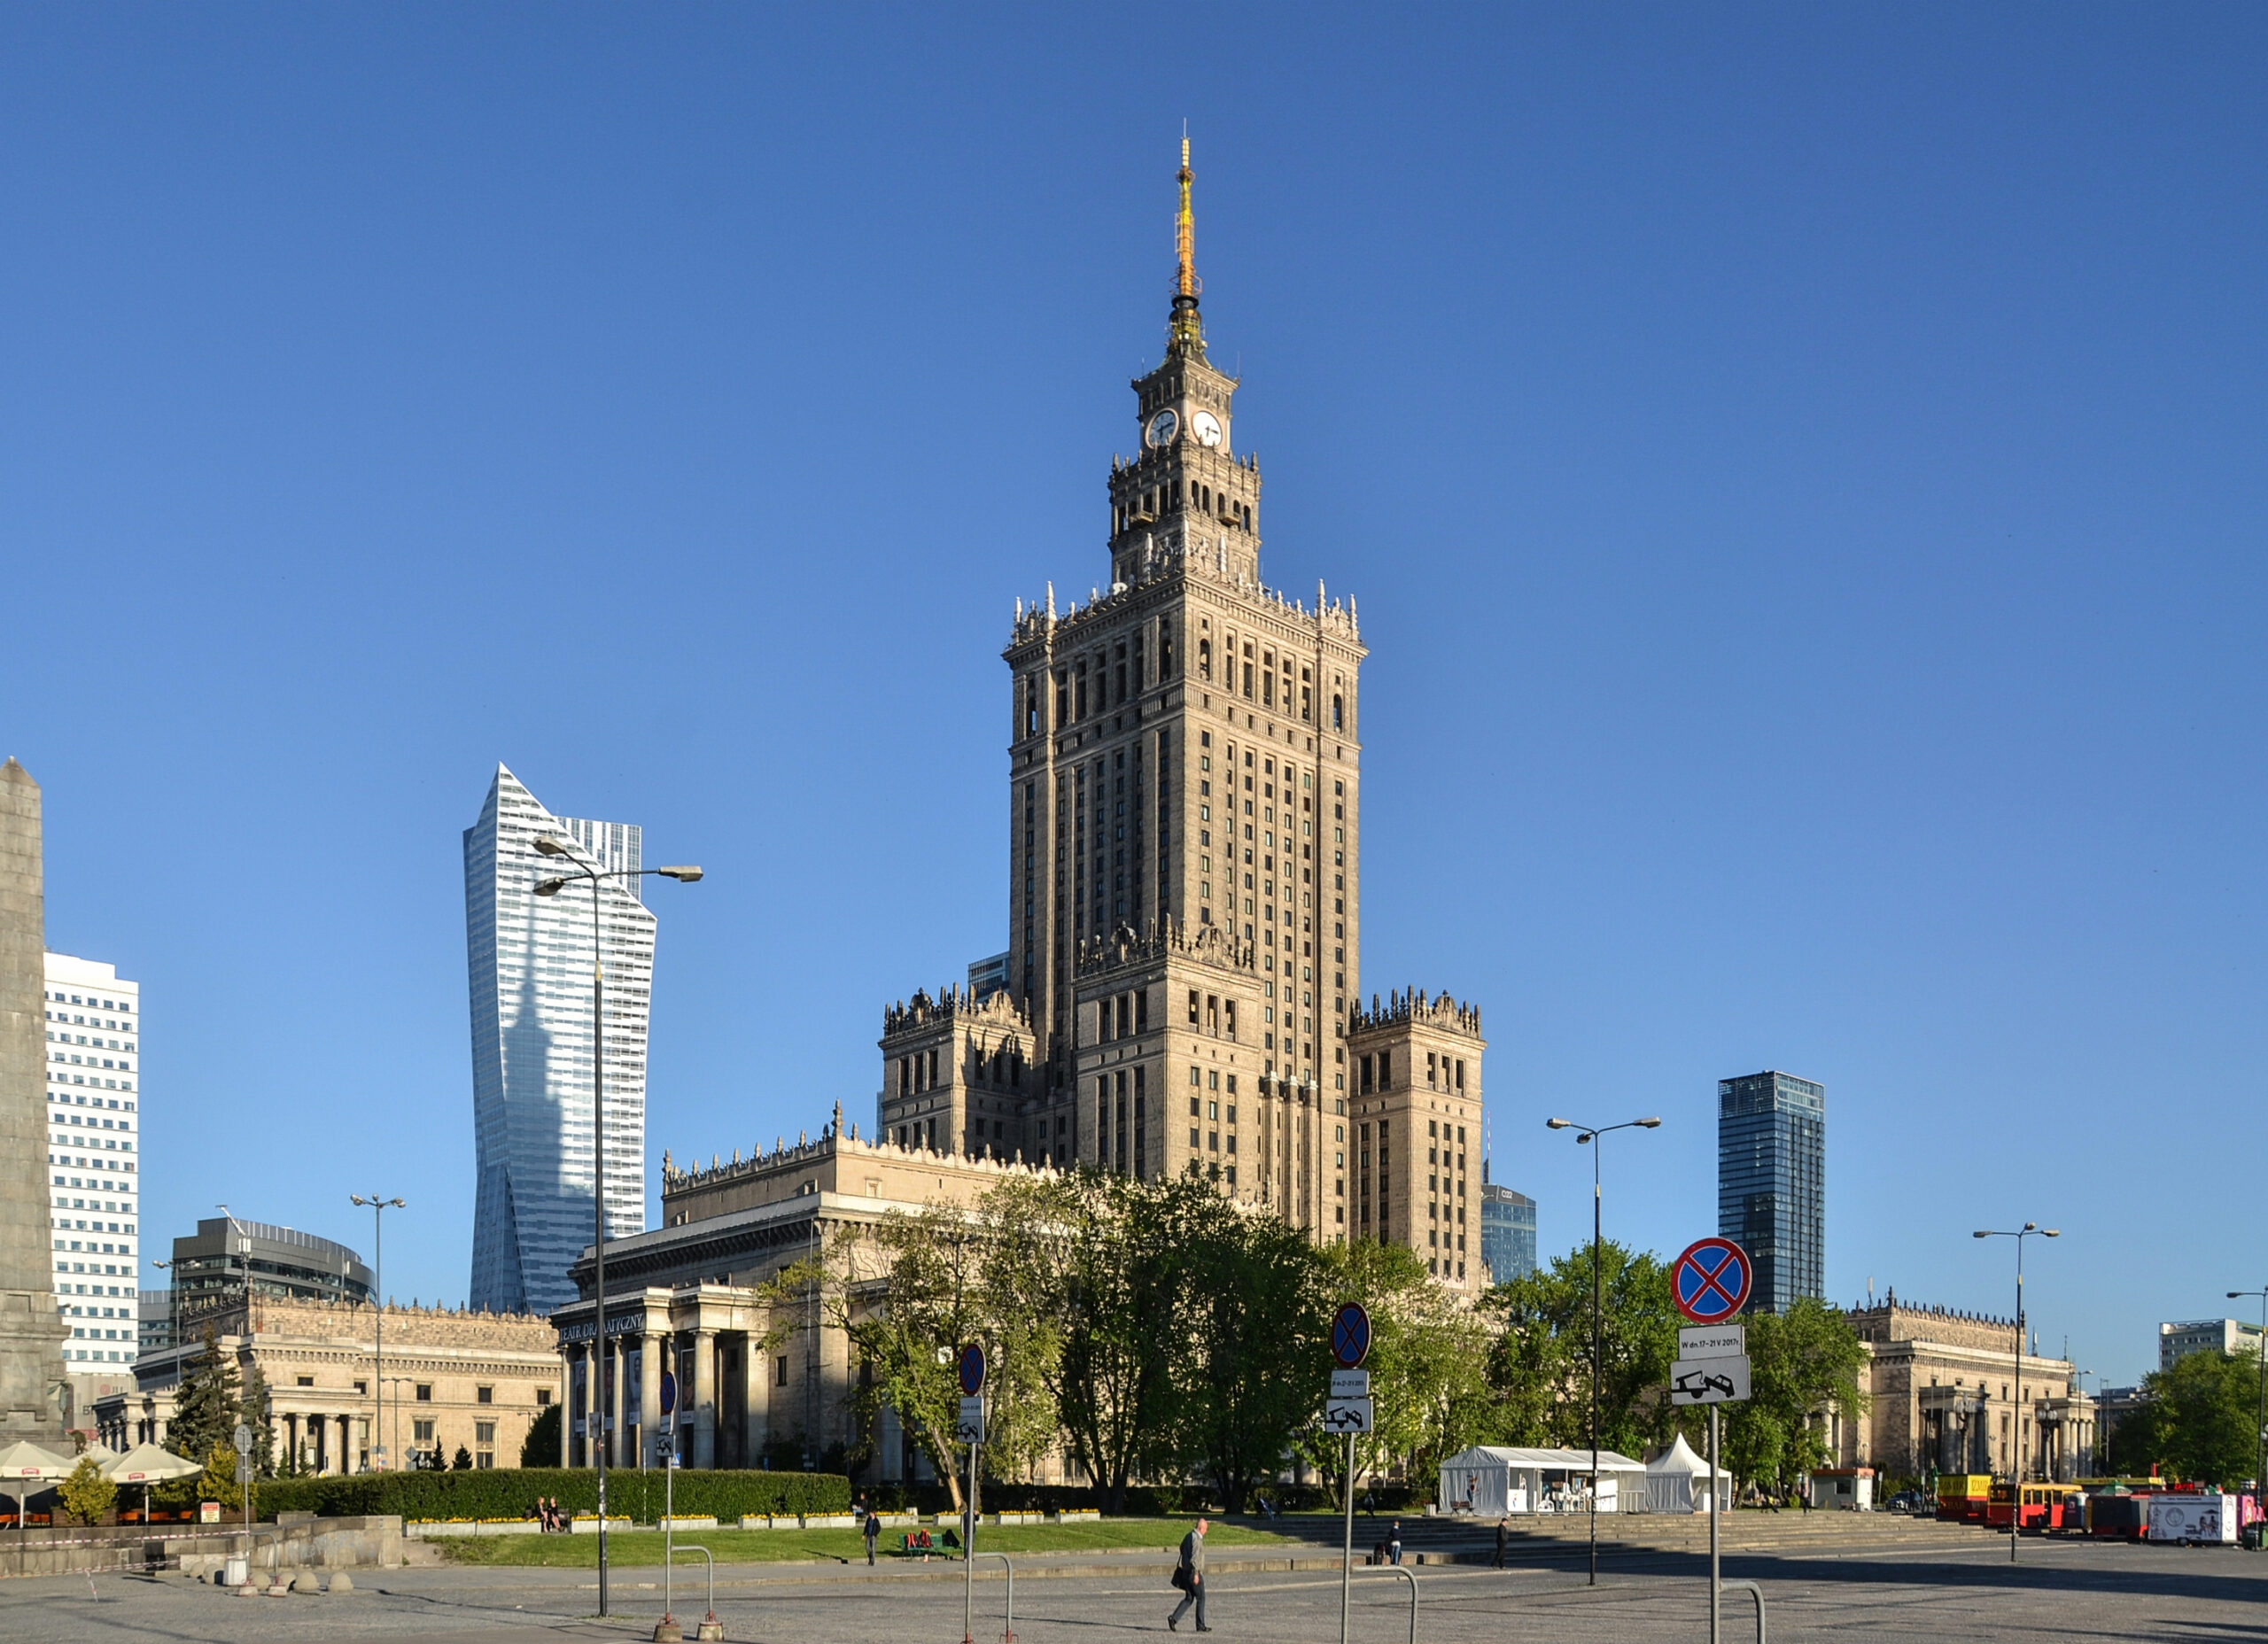 The Palace of Culture and Science